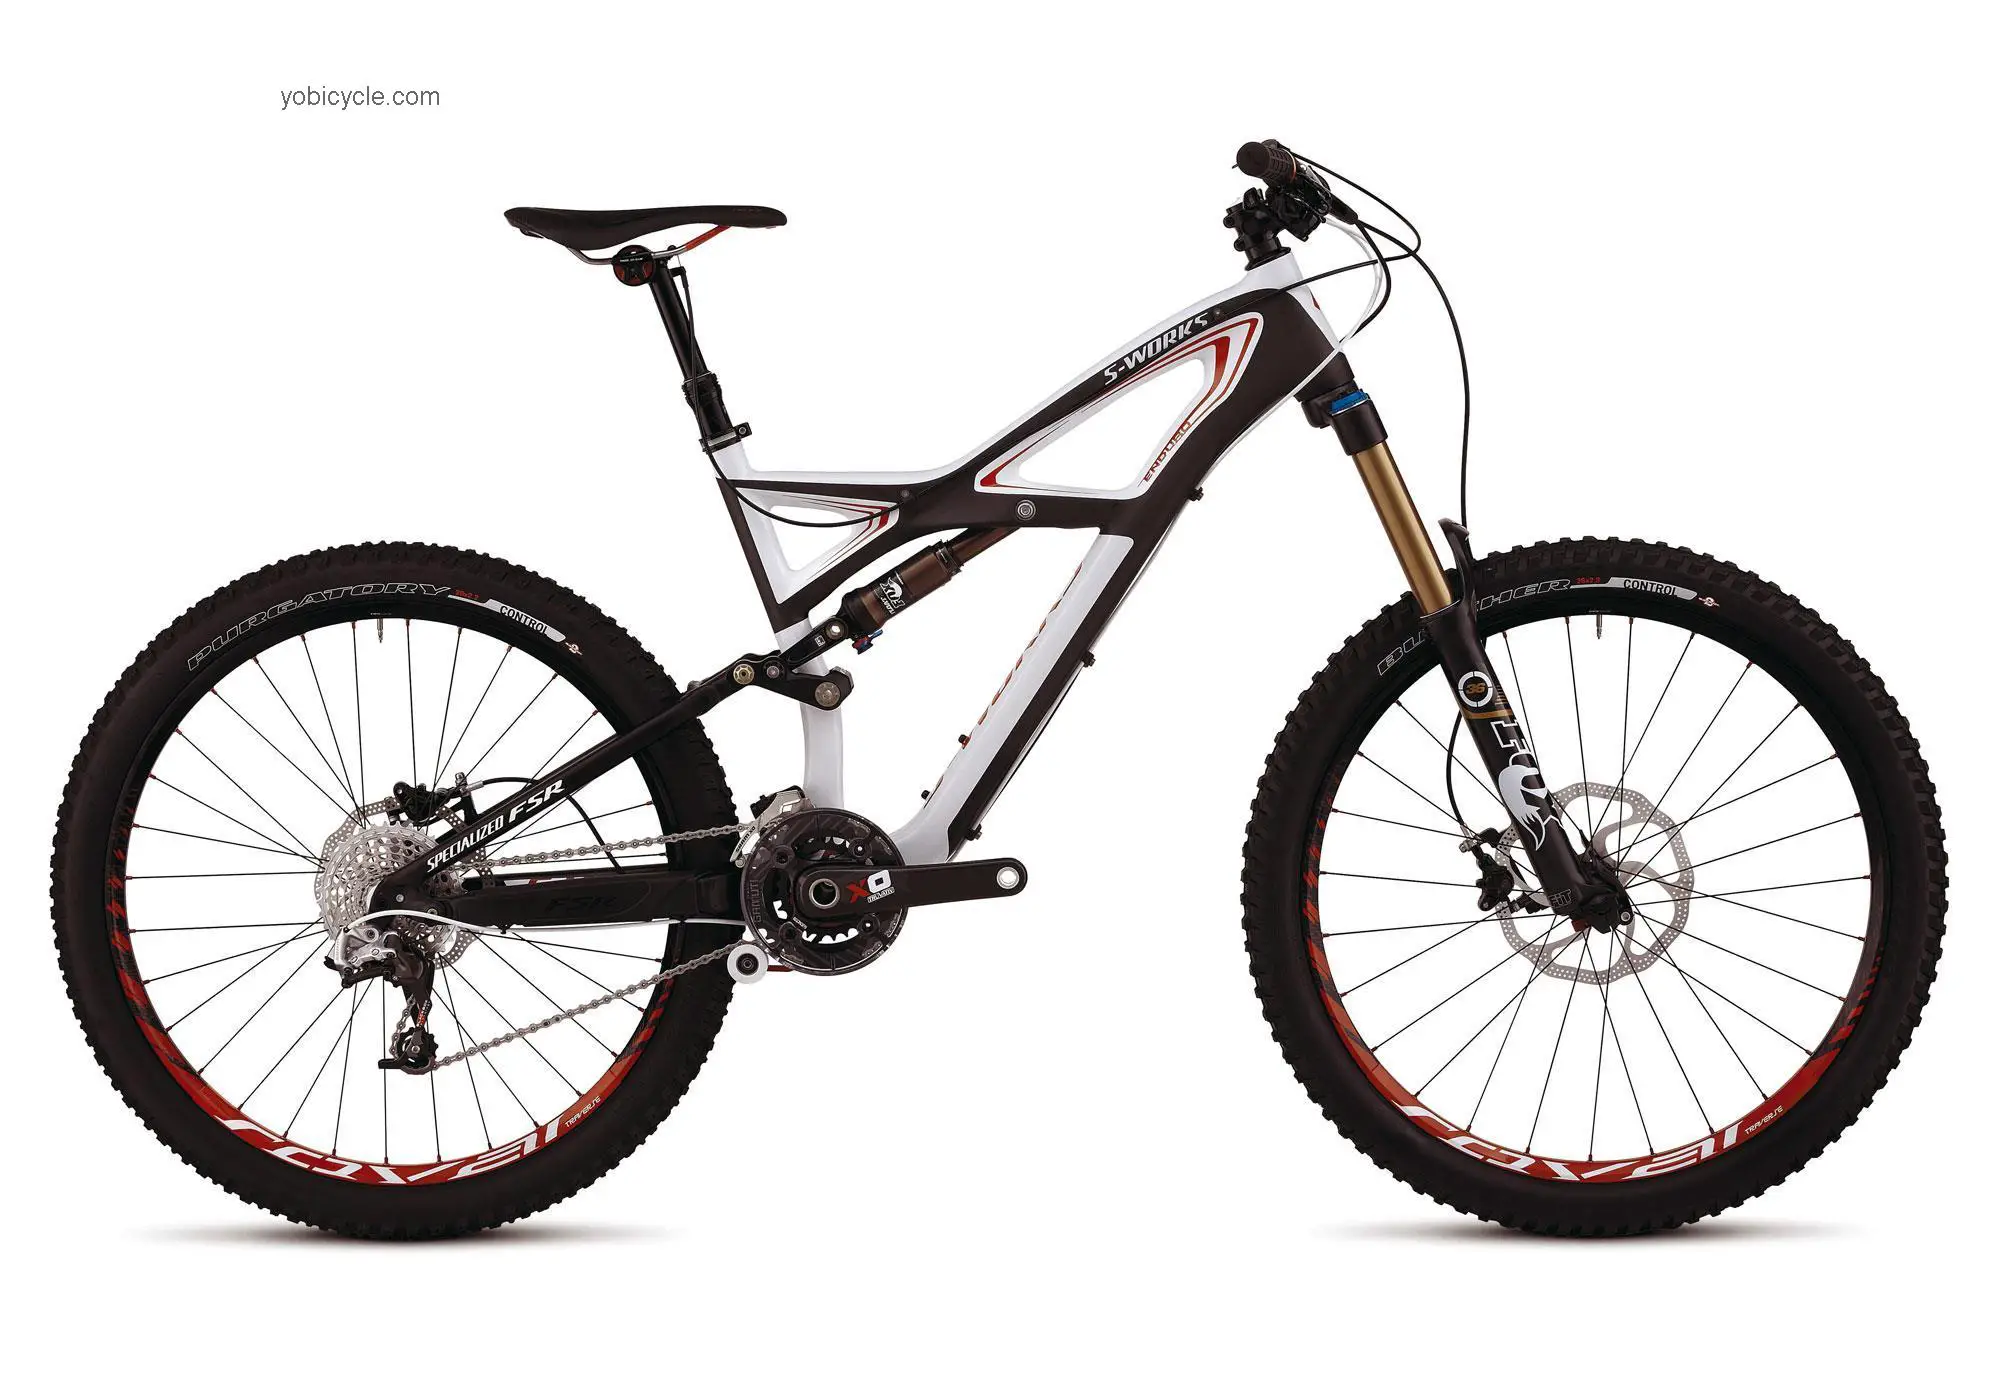 Specialized S-Works Enduro FSR Carbon 2012 comparison online with competitors